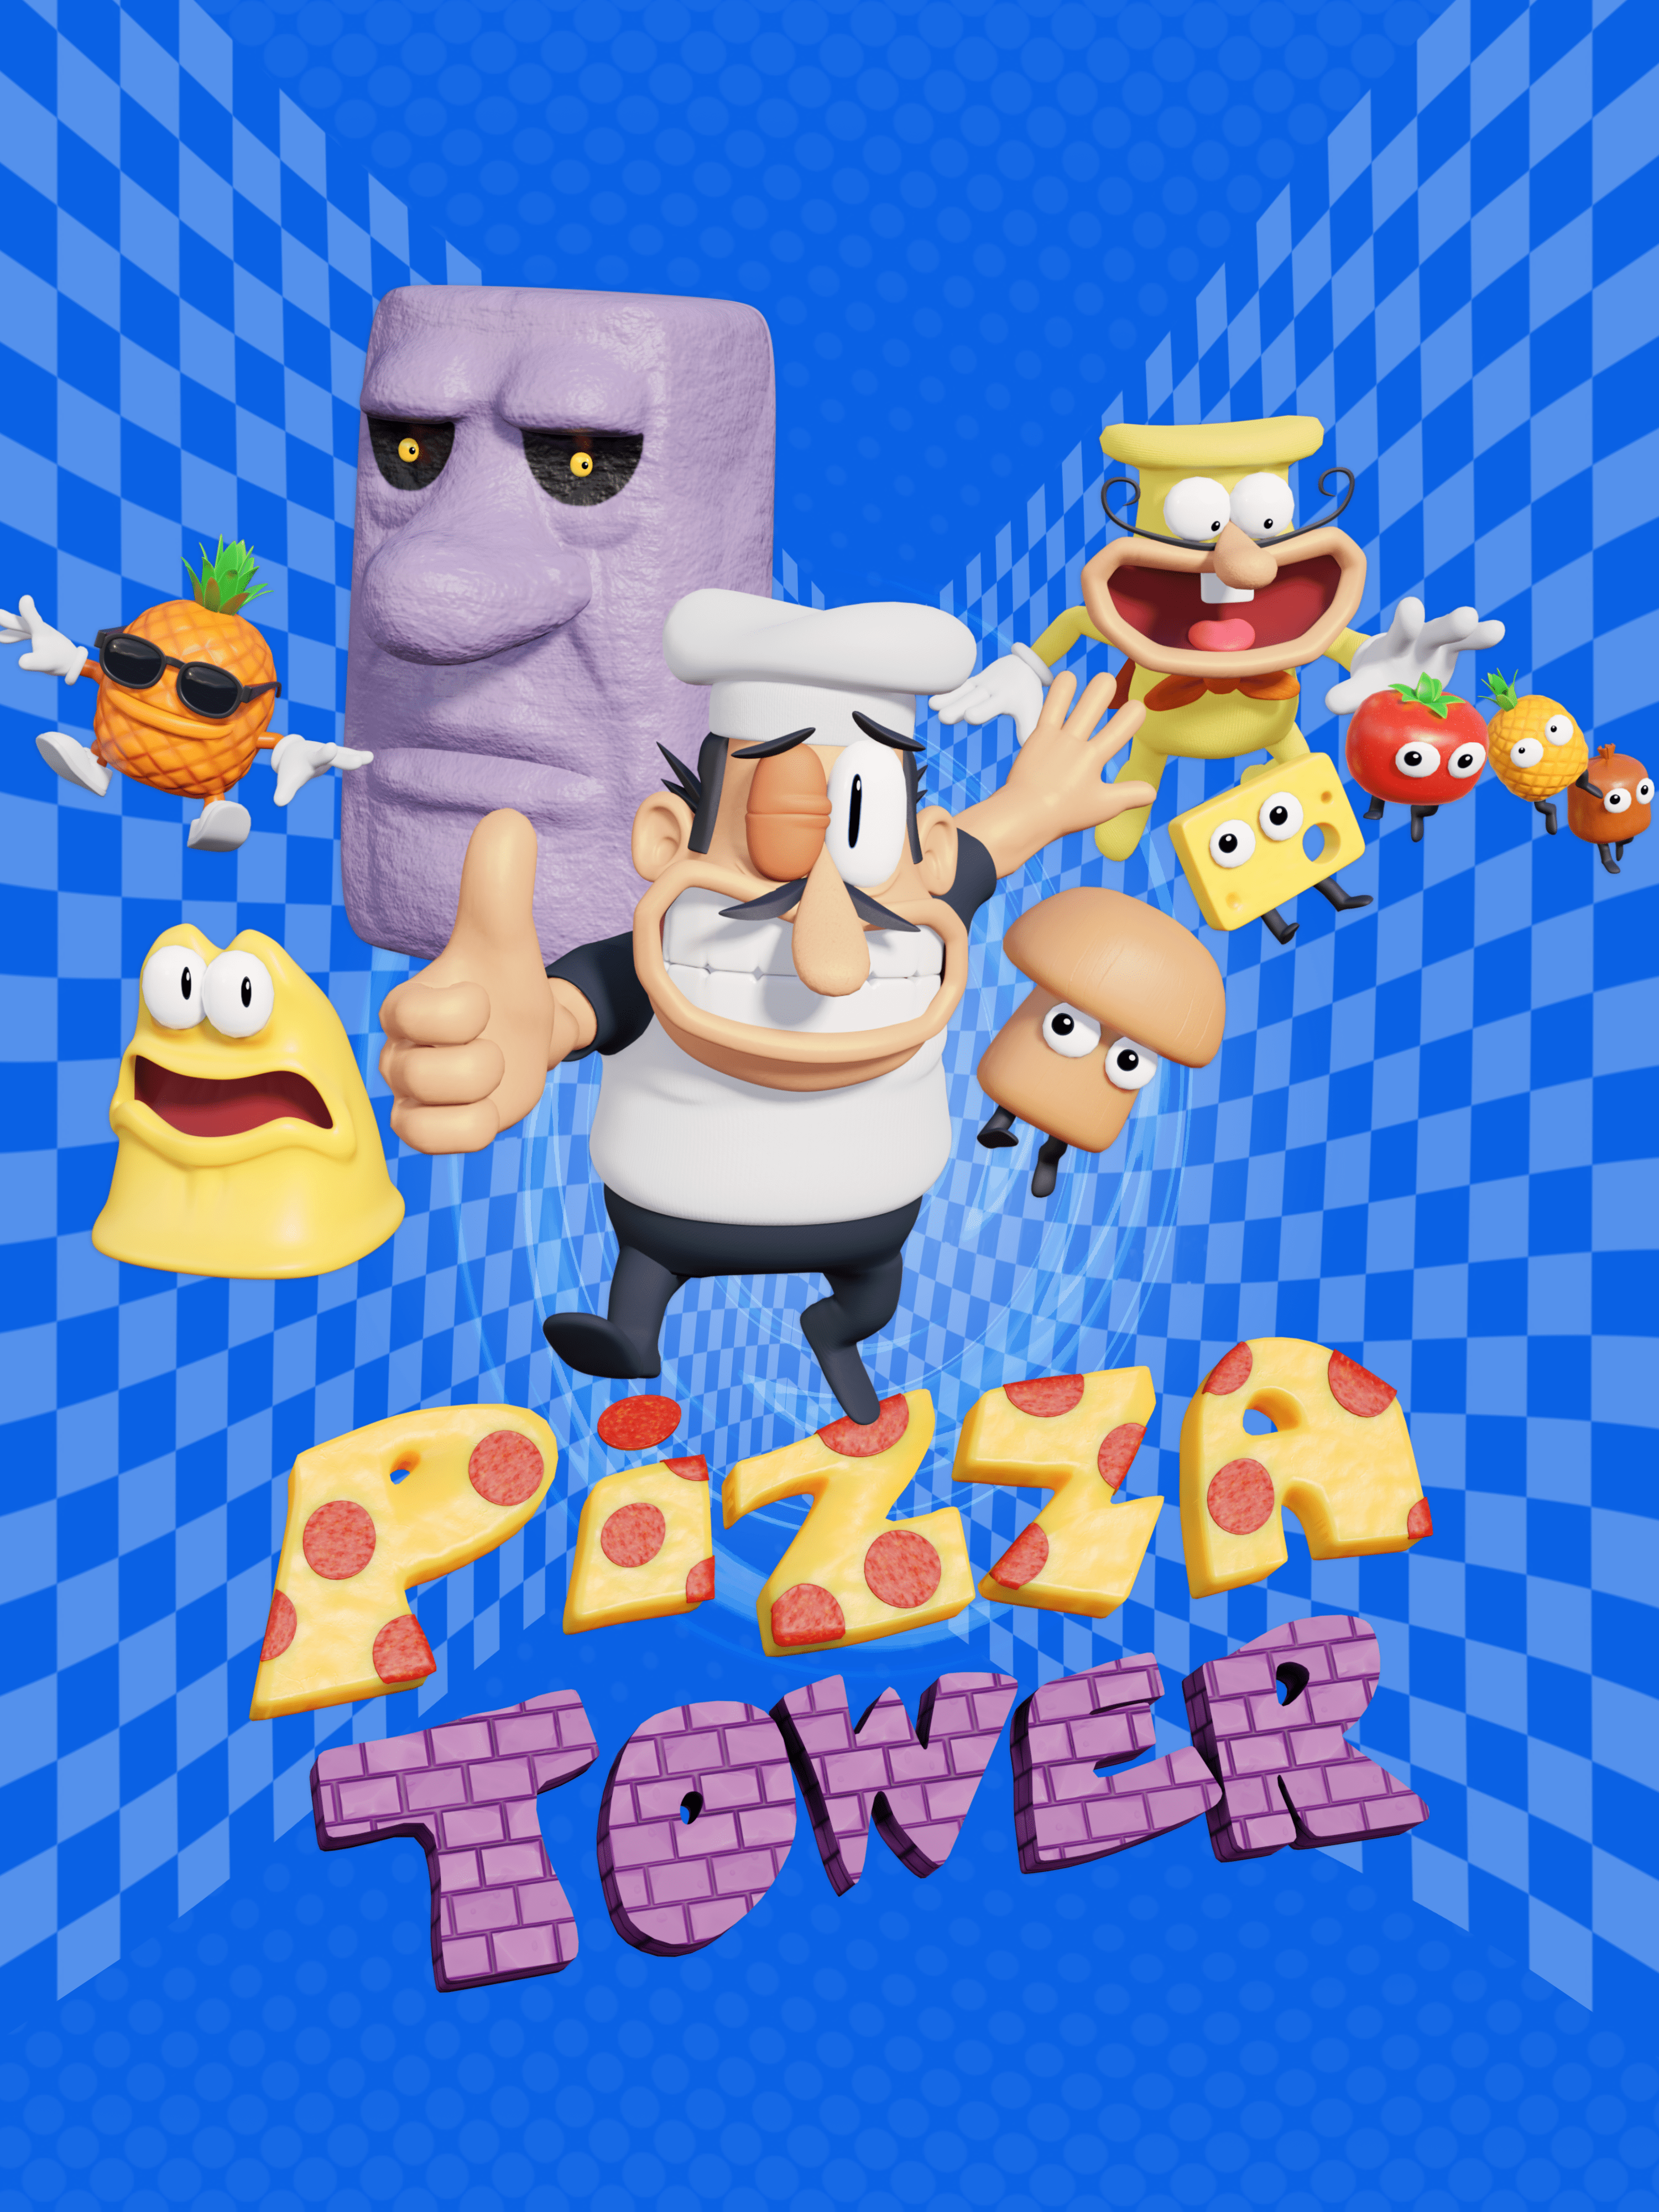 You crack me up, Pizza Buddy!  Pizza Tower 'Special Guest